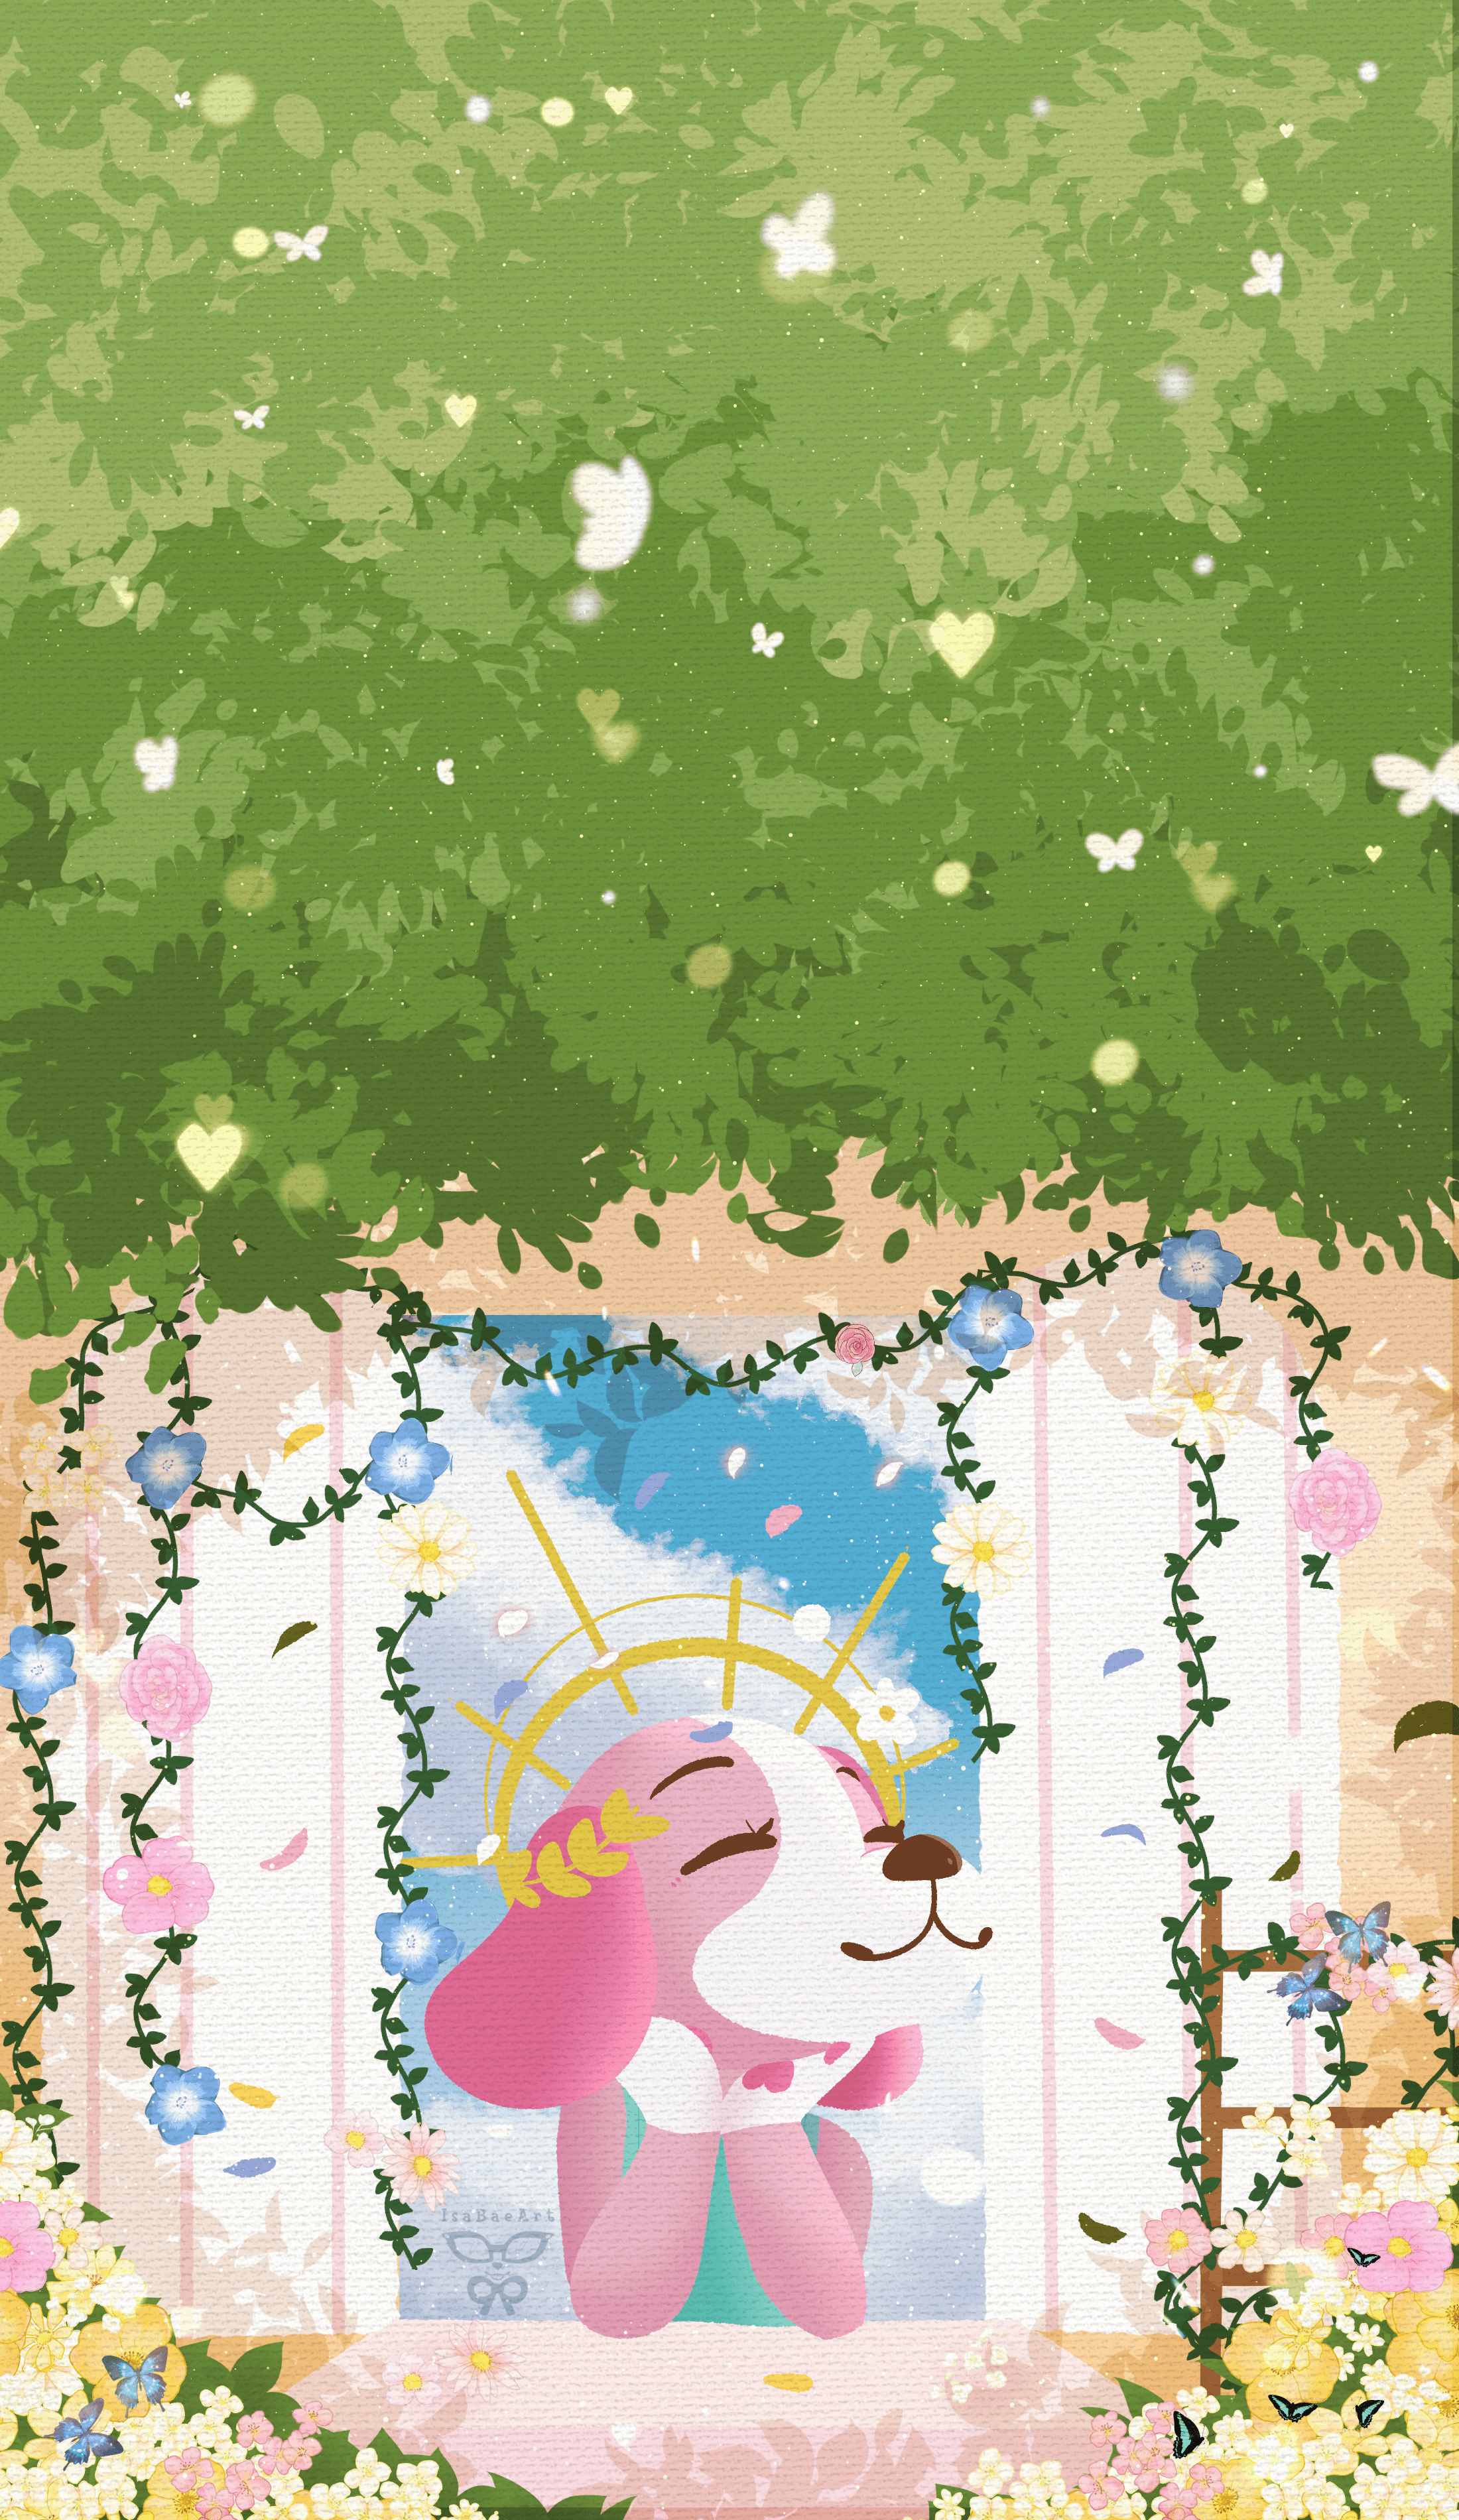 A pink dog sitting in front of some flowers - Animal Crossing